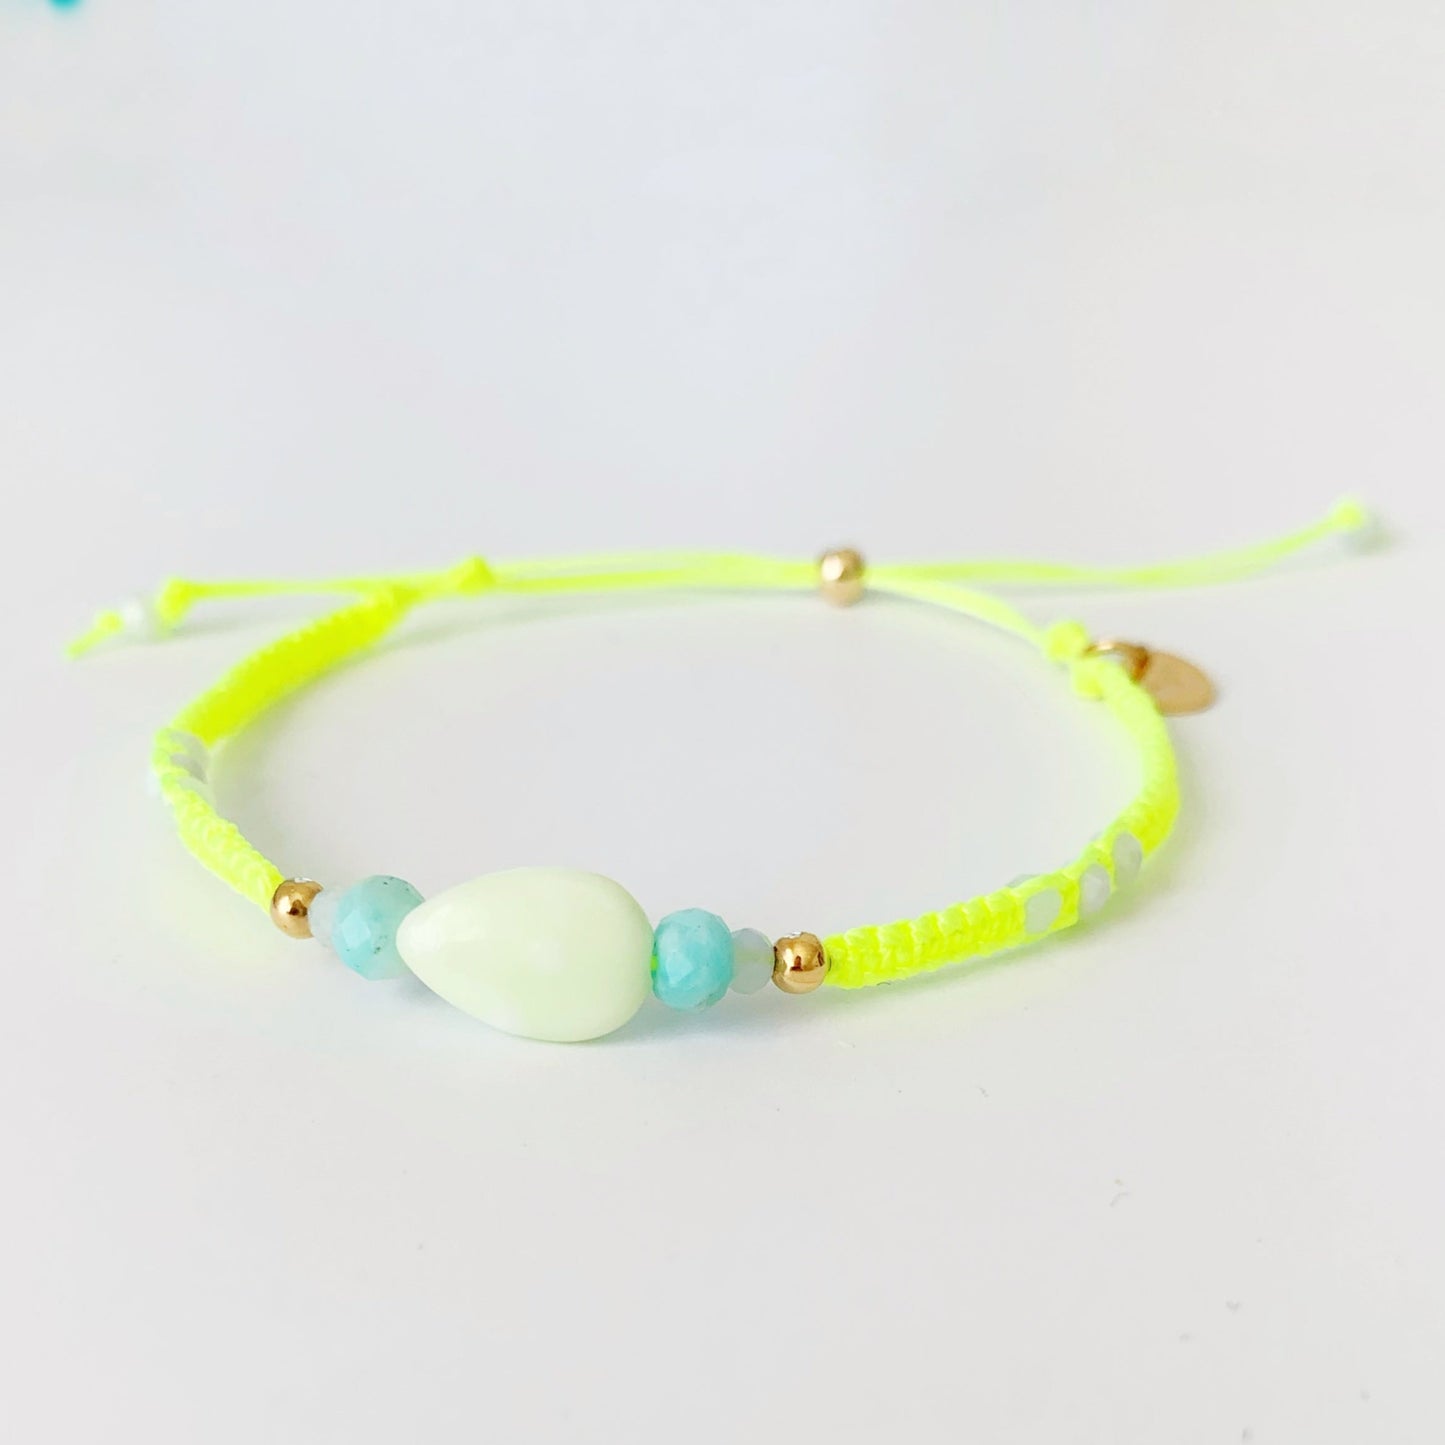 the mermaids and madeleines captiva macrame bracelet in color sips on the court is a neon yellow cord friendship bracelet with semiprecious beads at the center and a 14k gold filled slide clasp. this one is photographed on a white surface